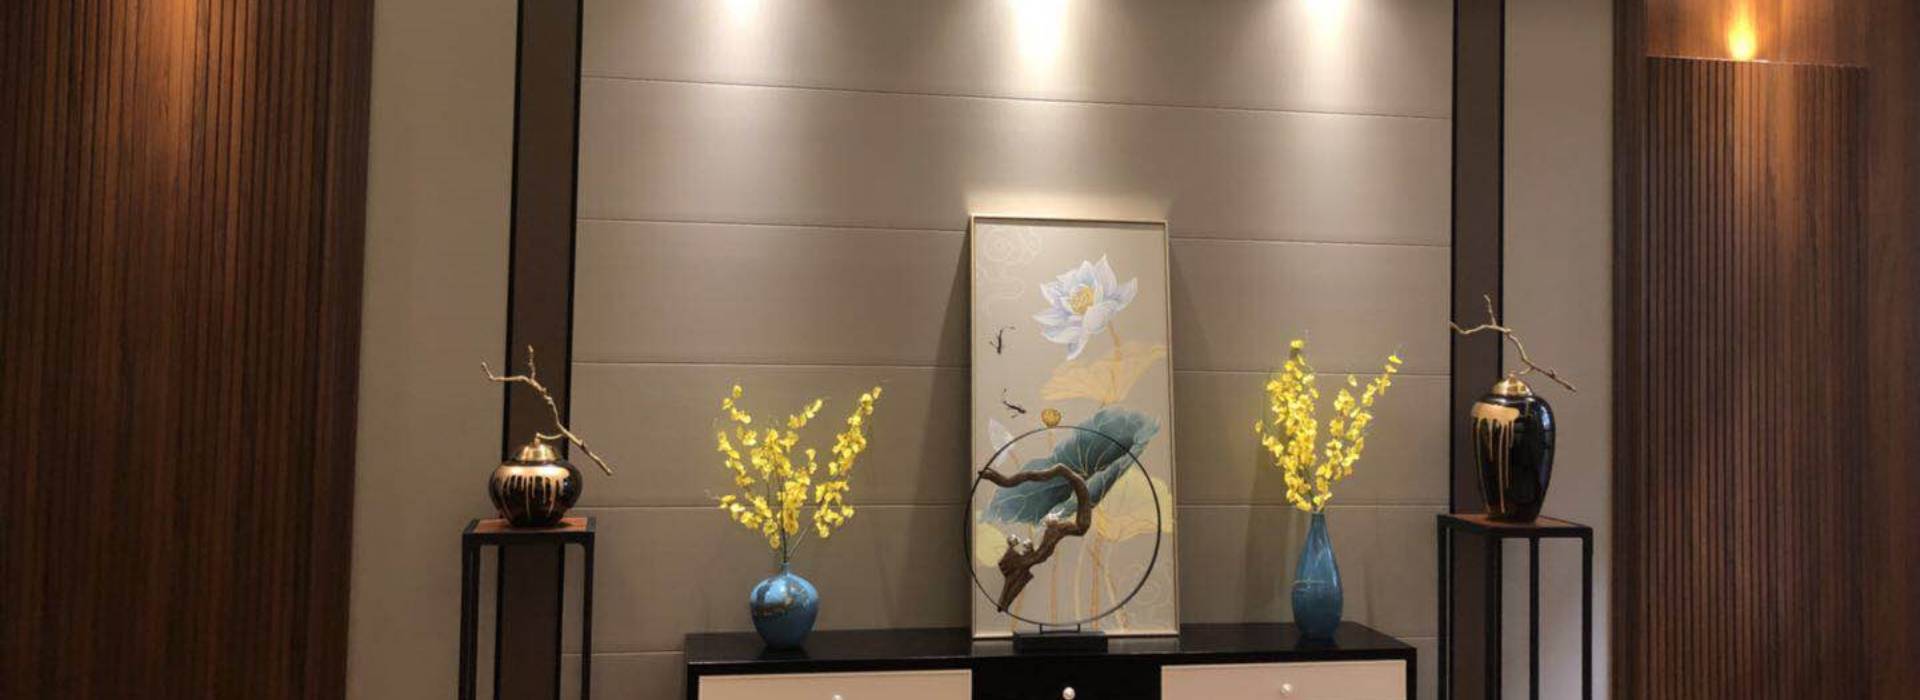 A picture of our wall paneling decoration effect